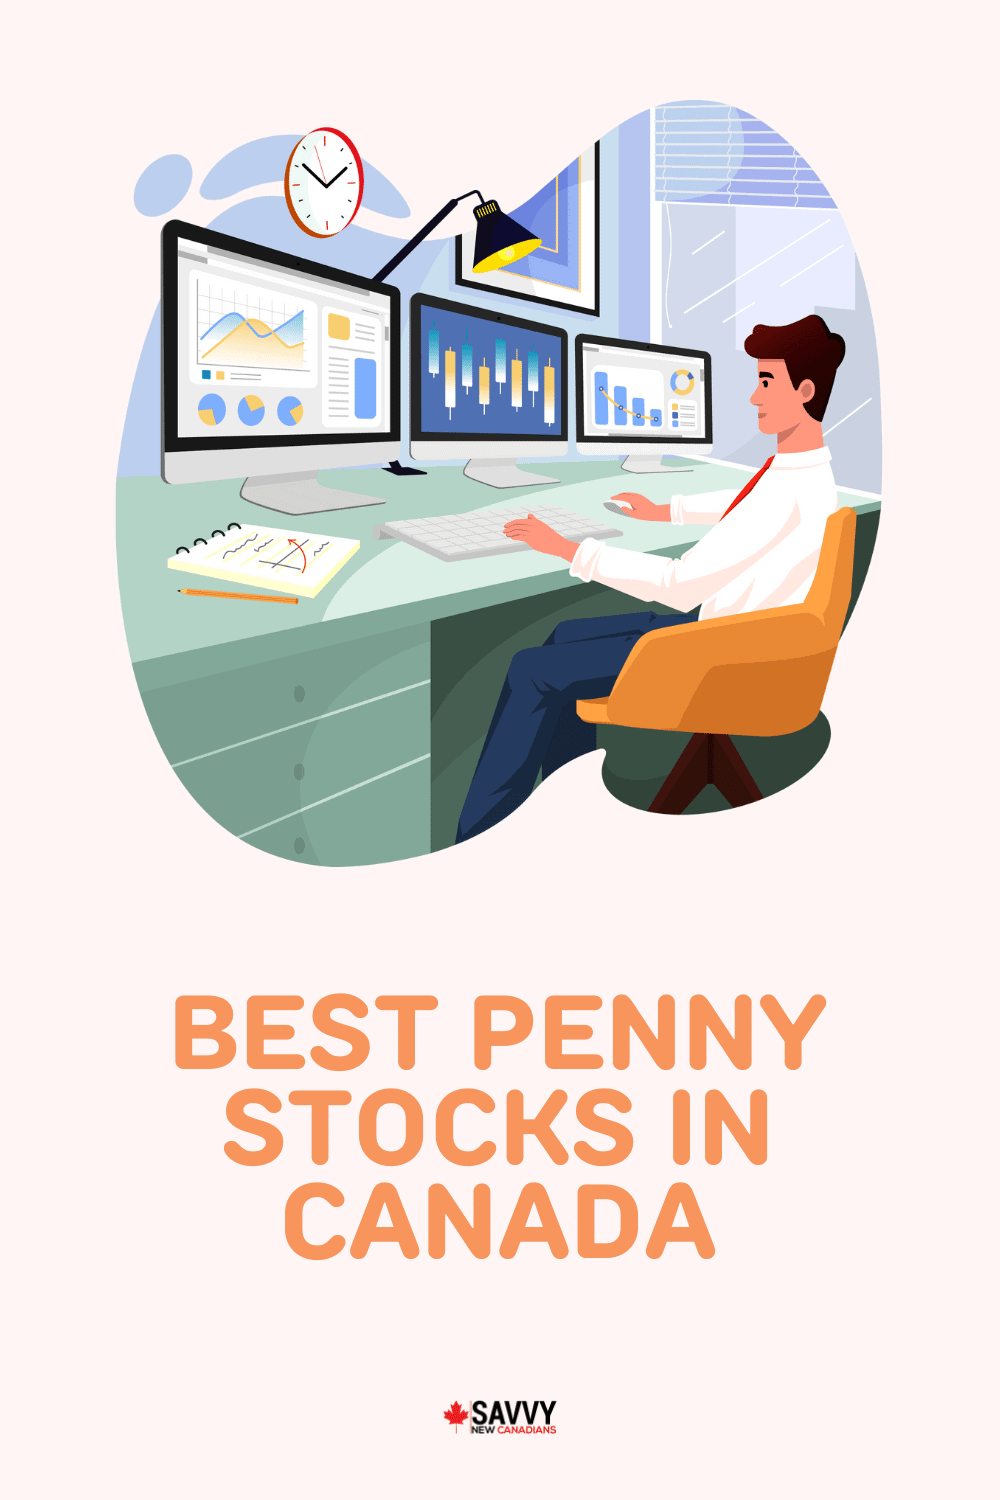 15 Best Penny Stocks in Canada for 2022